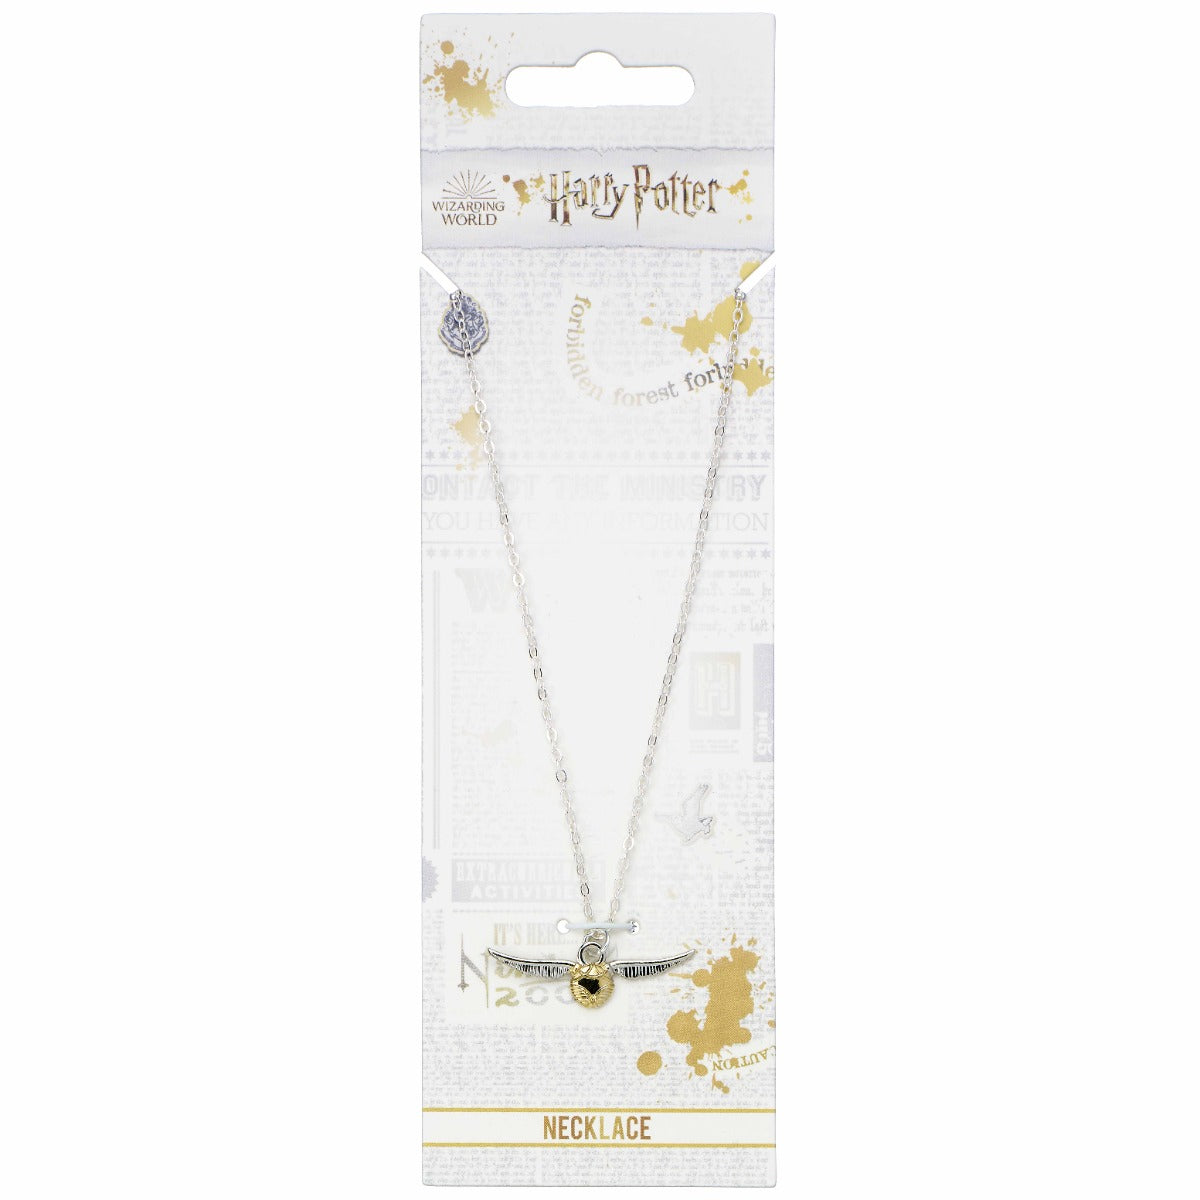 Load image into Gallery viewer, Golden Snitch (Harry Potter) Link Chain Necklace
